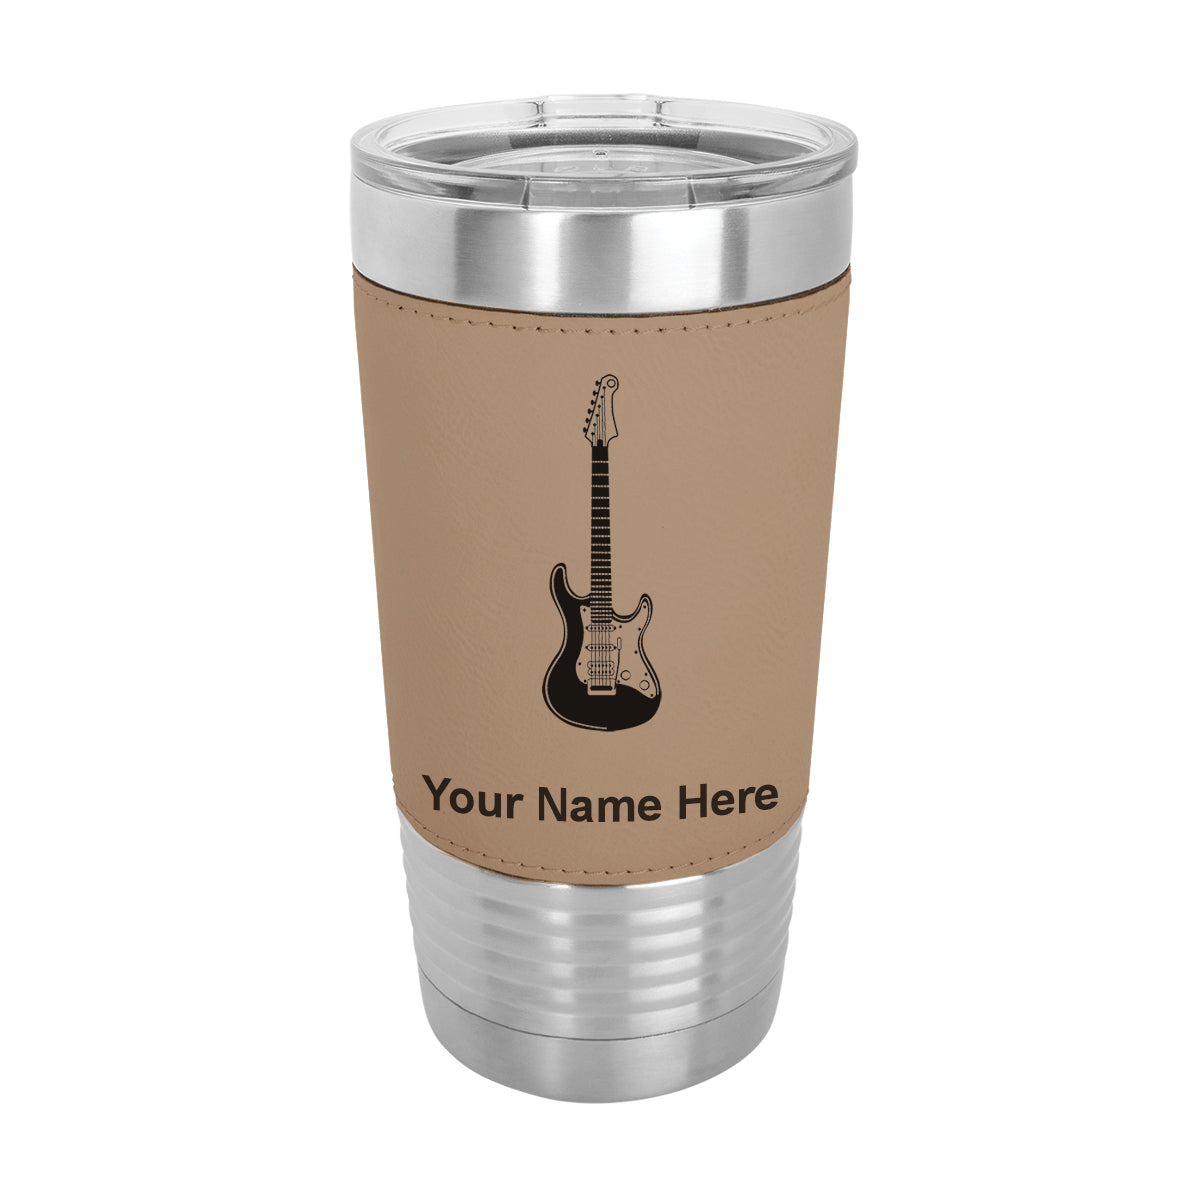 20oz Faux Leather Tumbler Mug, Electric Guitar, Personalized Engraving Included - LaserGram Custom Engraved Gifts